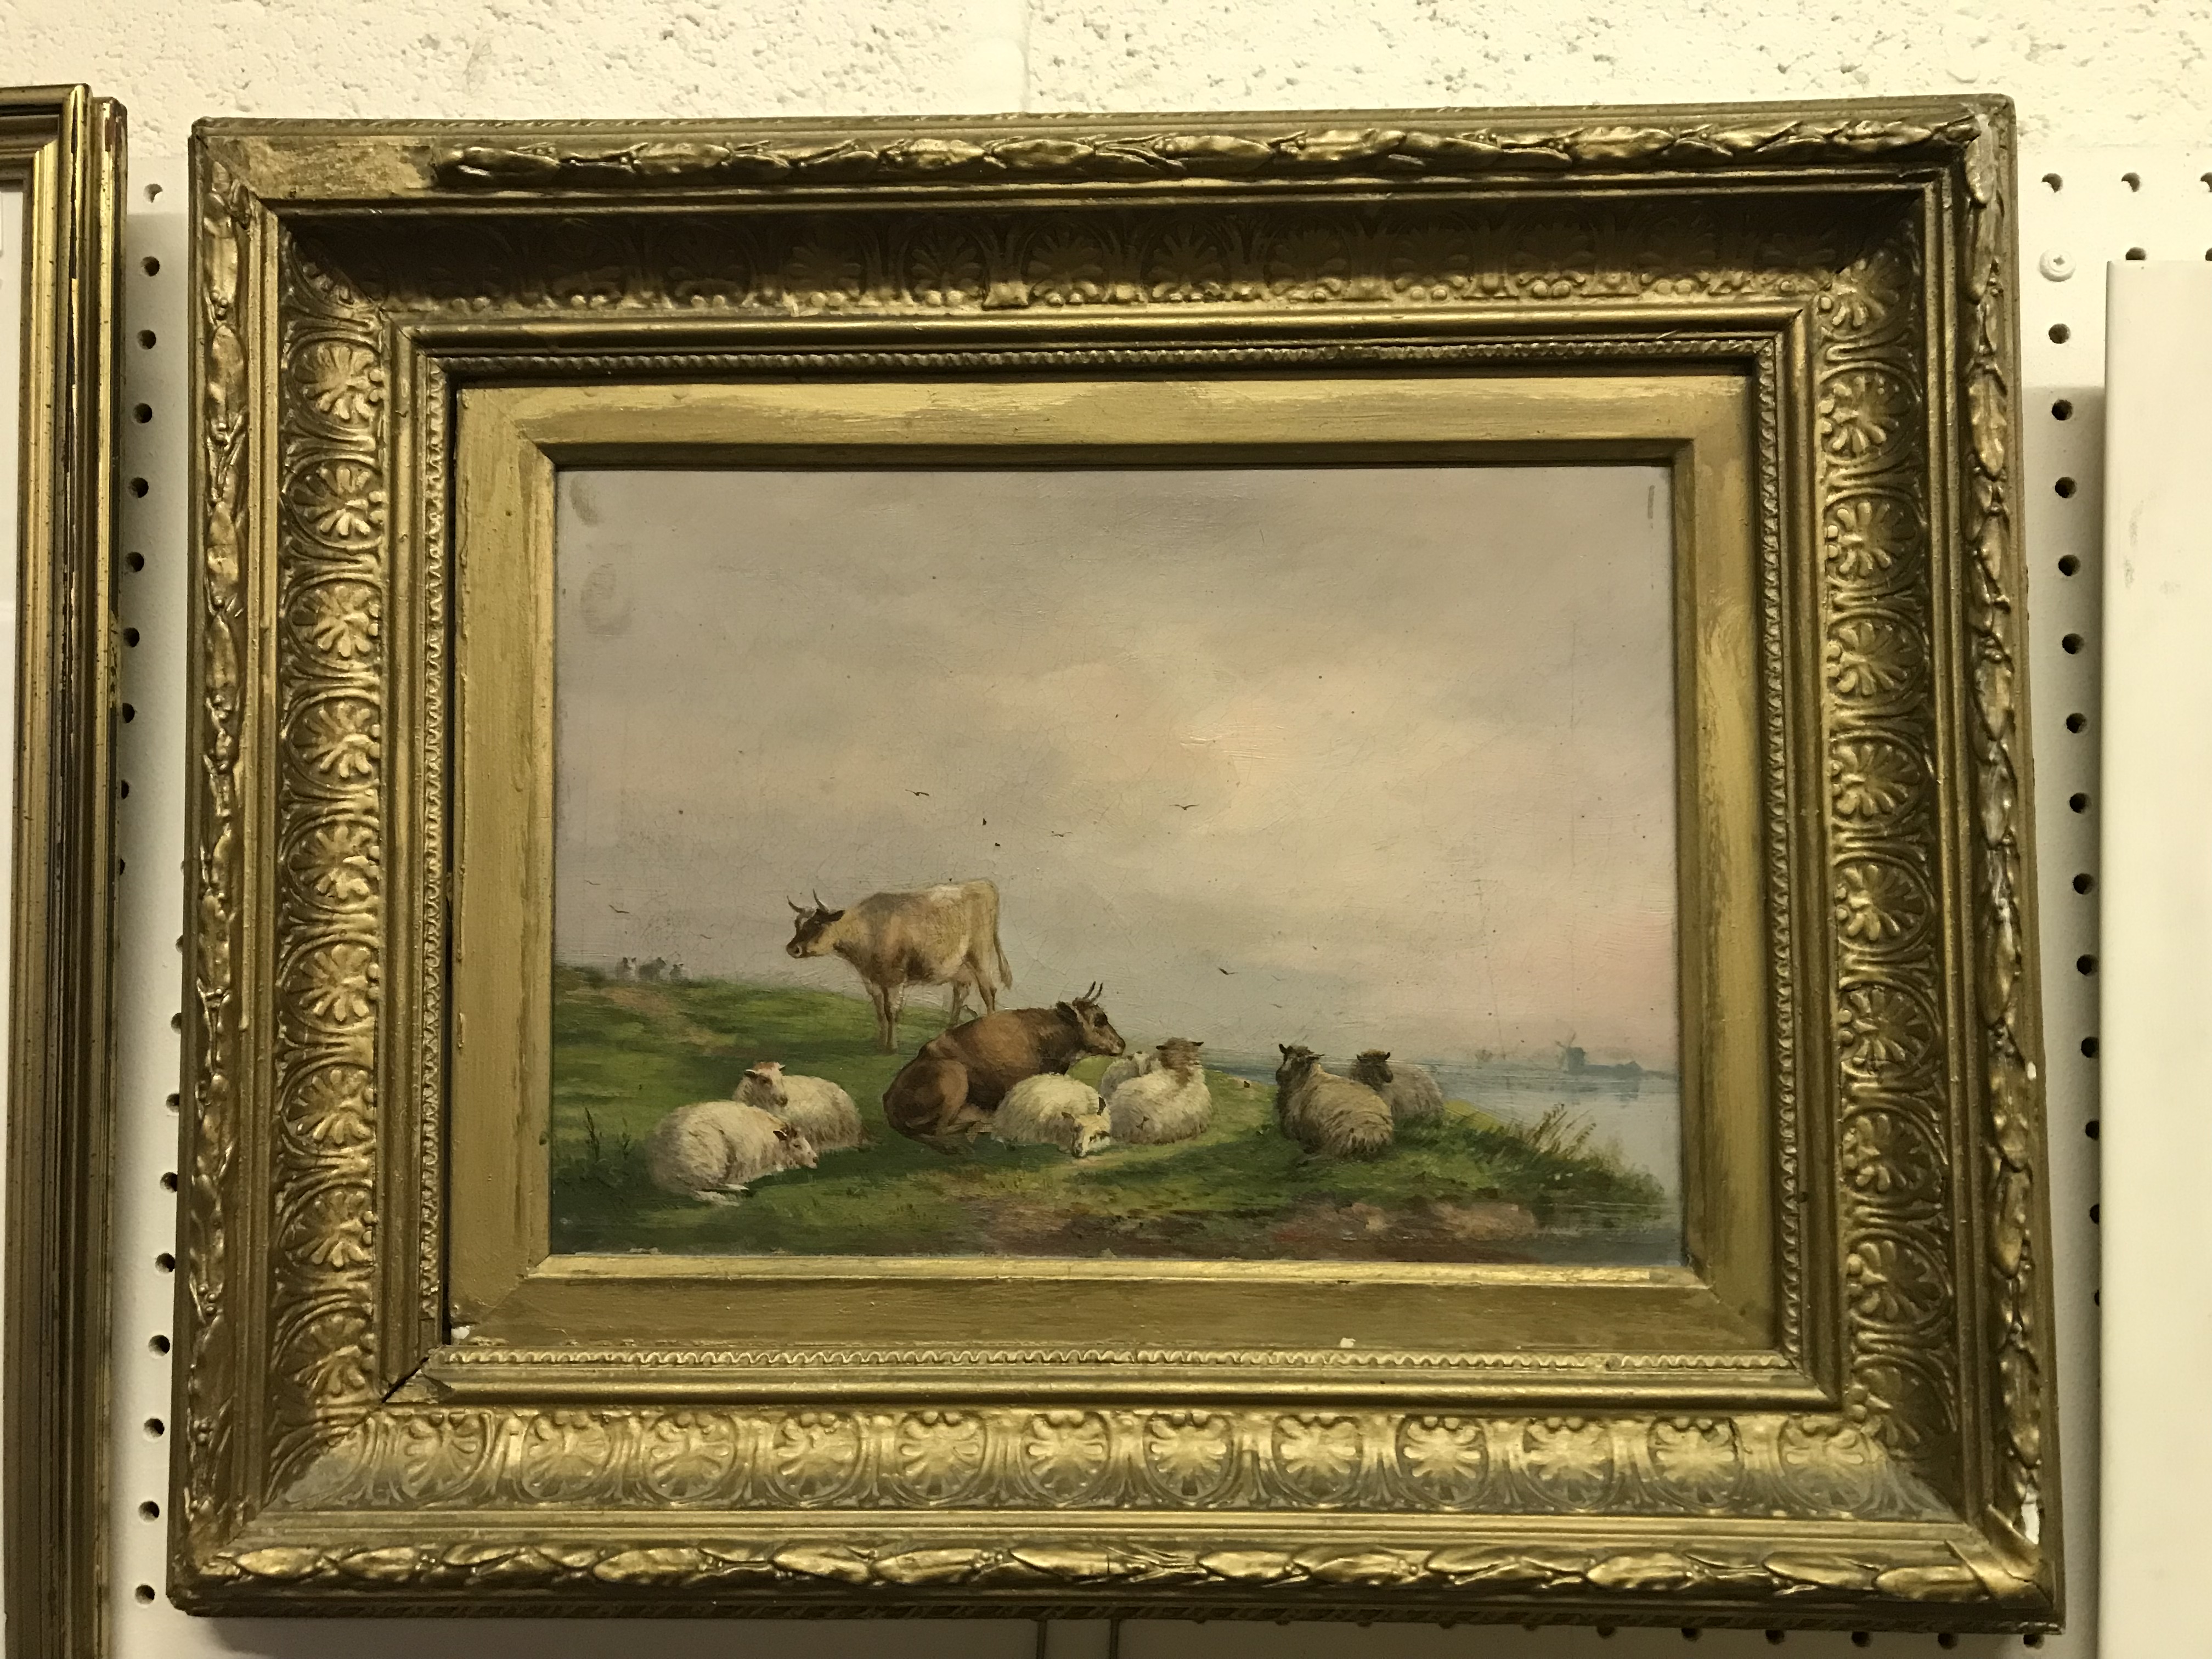 19TH CENTURY ENGLISH SCHOOL "Study of cattle by river with windmills in mid ground", oil on canvas, - Image 2 of 2